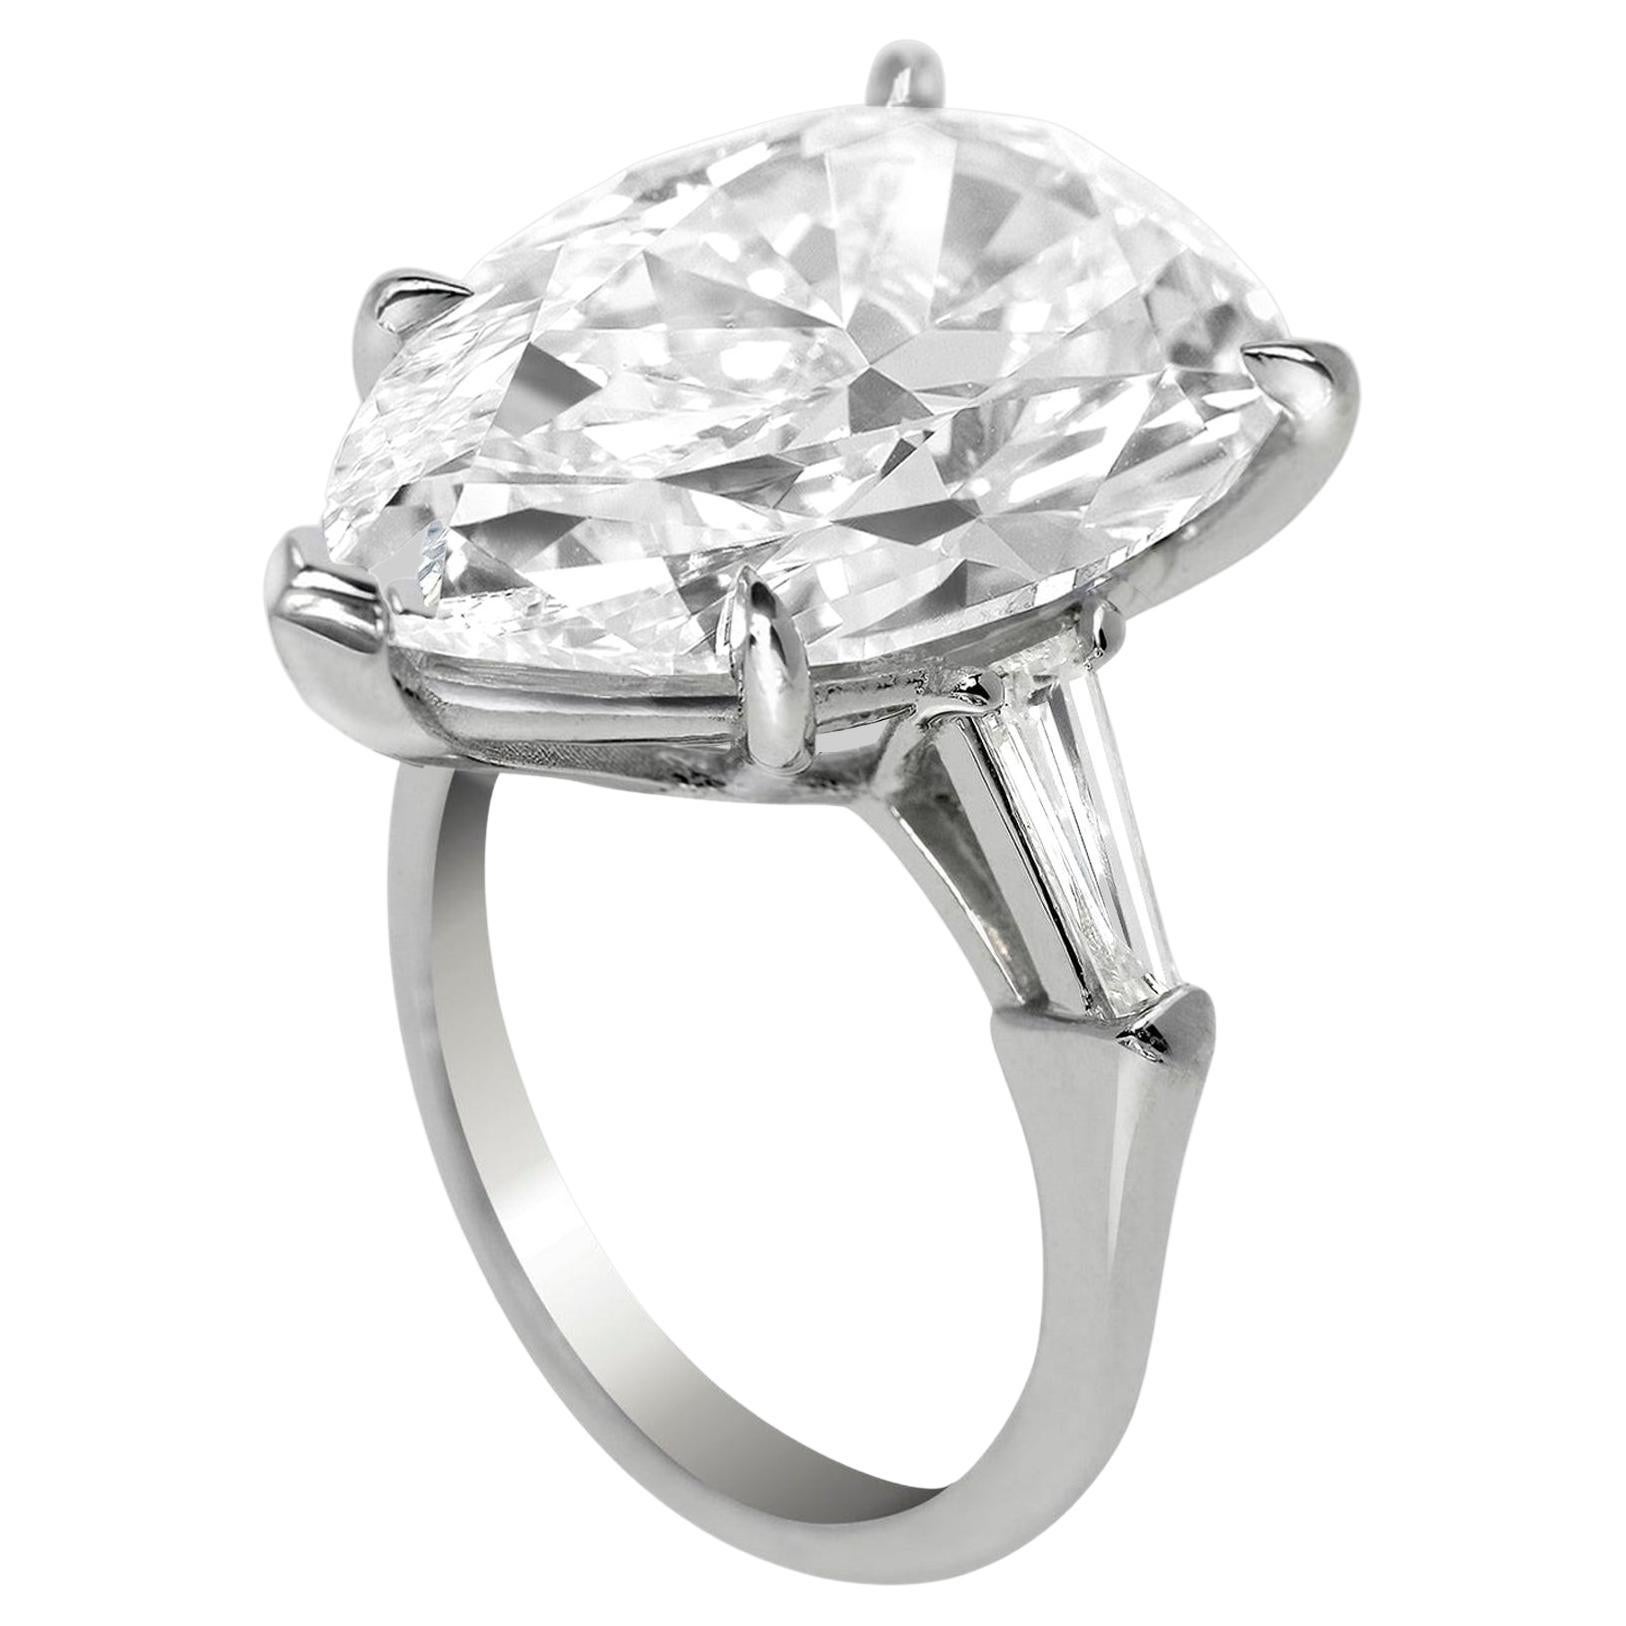 GIA Certified 6.51 Carat Natural Pear Brilliant Cut Diamond.
This Beautiful Diamond has a Maximum grade for color and has graded flawless for the Clarity.
Platinum Engagement Ring Featuring a 6 Carat Pear-Cut Diamond (GIA Report) As flawless Clarity